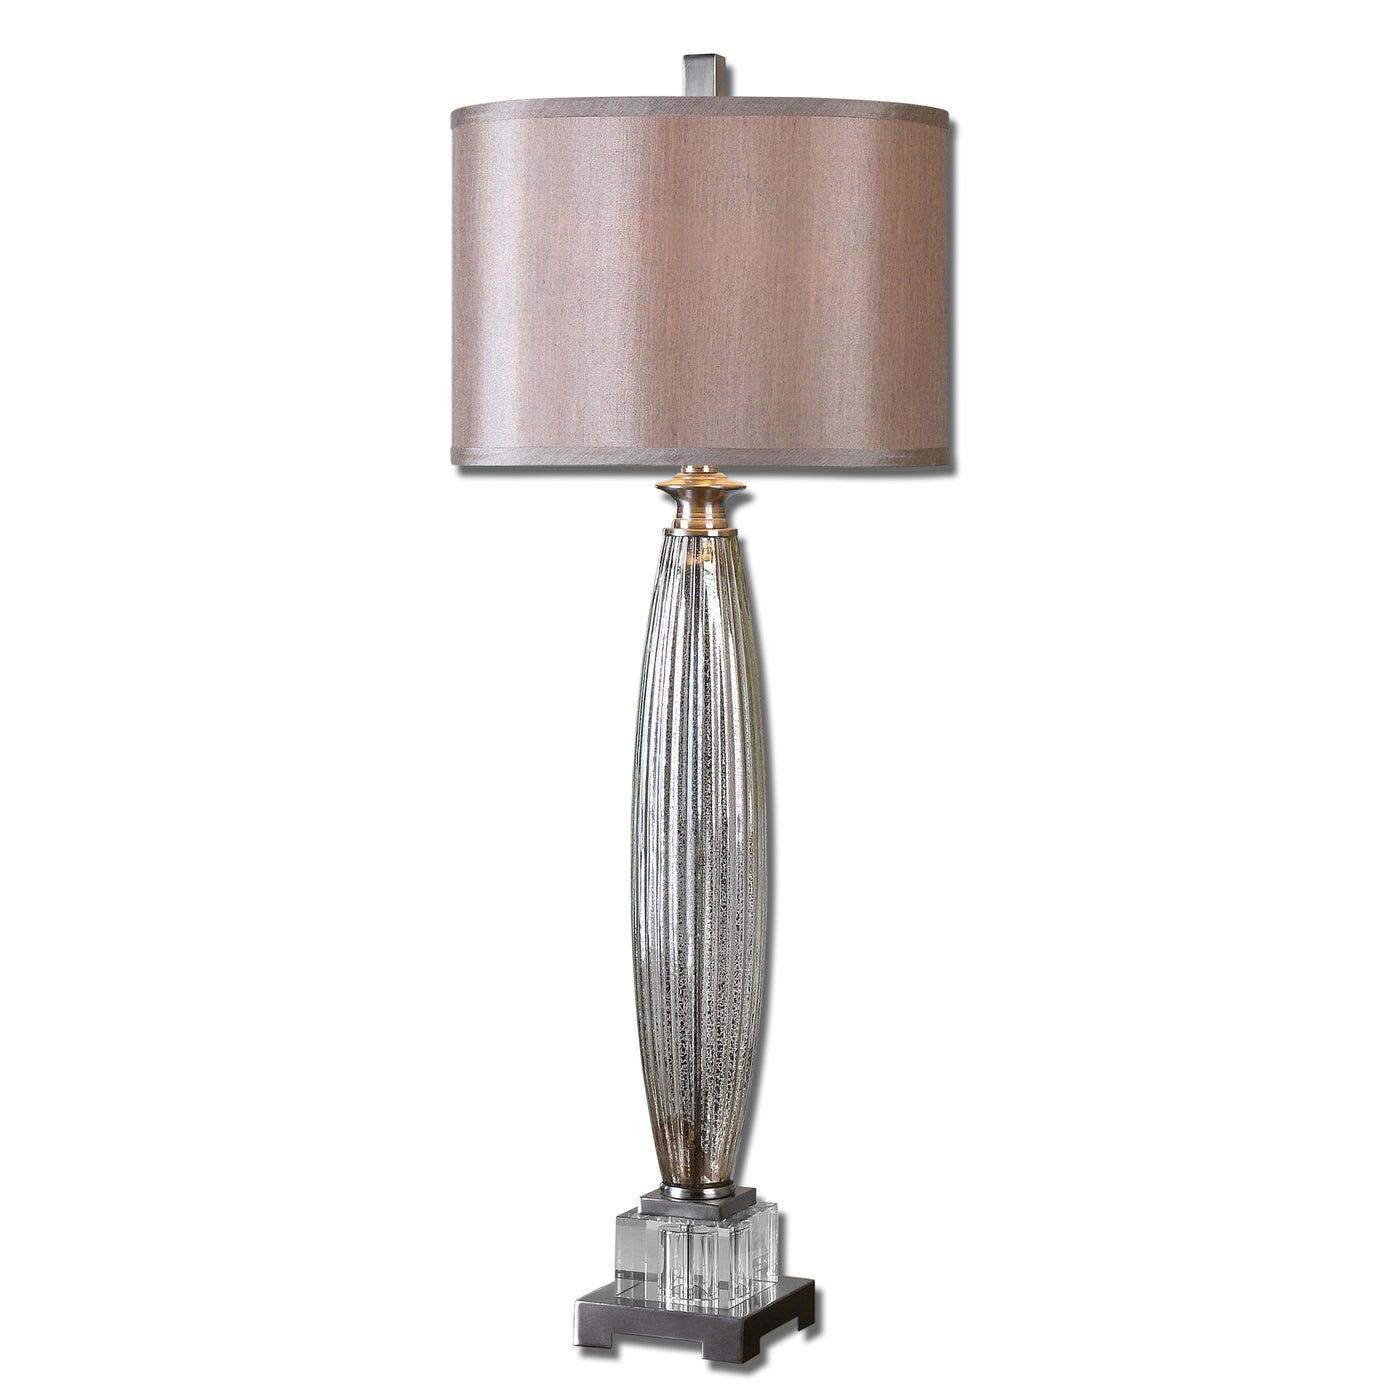 Fluted Mercury Glass With Brushed Nickel Plated Details And Crystal Accents. The Round Hardback Is A Silken Champagne Bron...